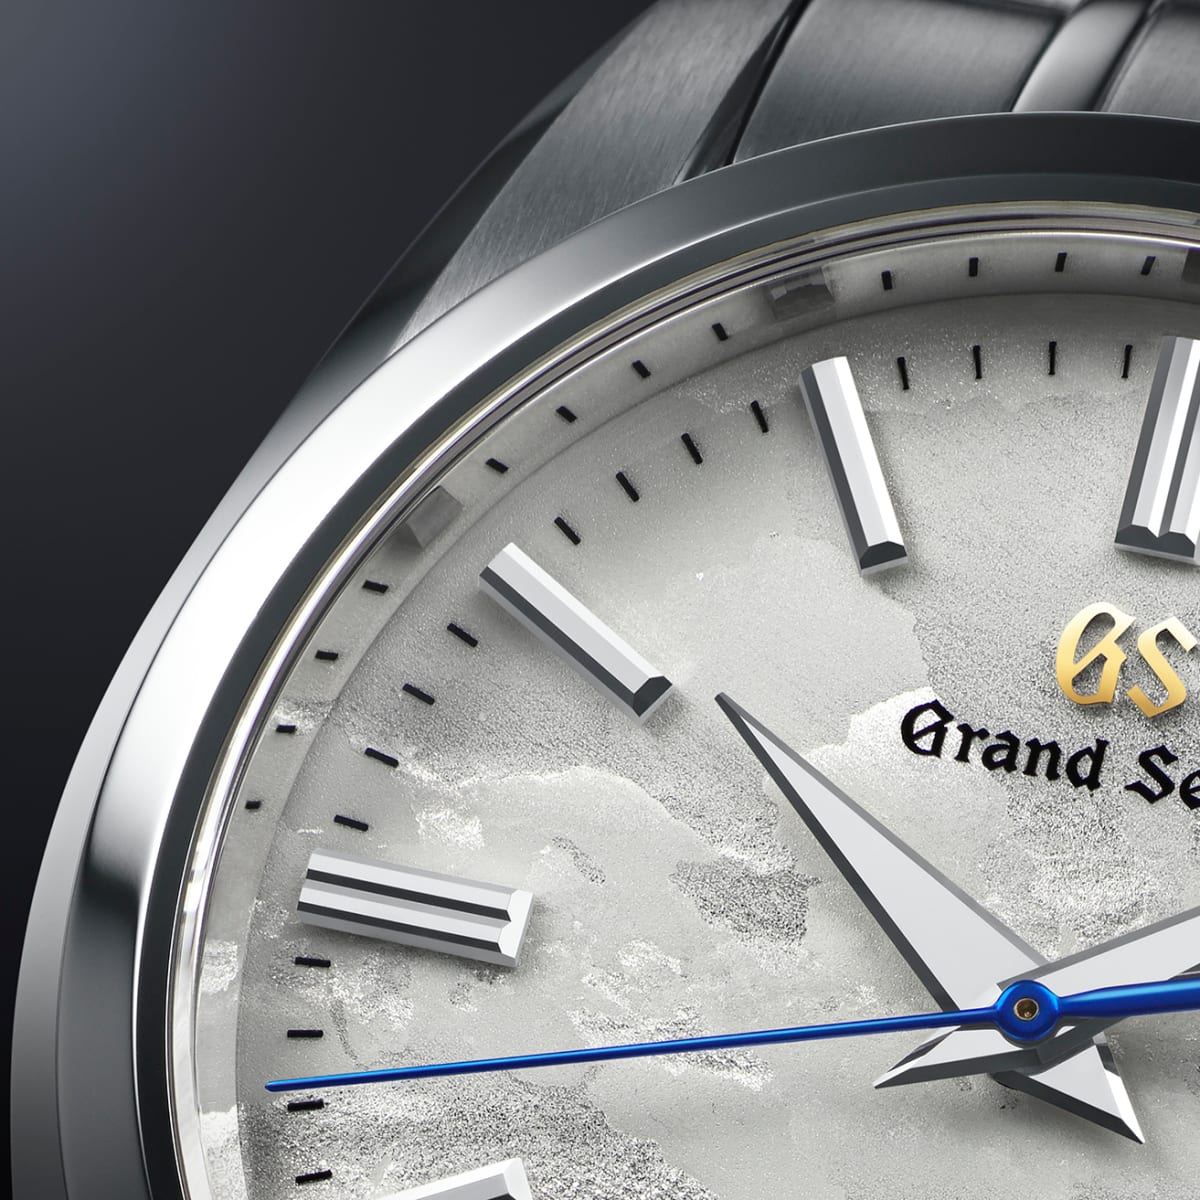 Grand Seiko's SBH311 features a dial inspired by the clouds over Mt. Iwate  - Acquire